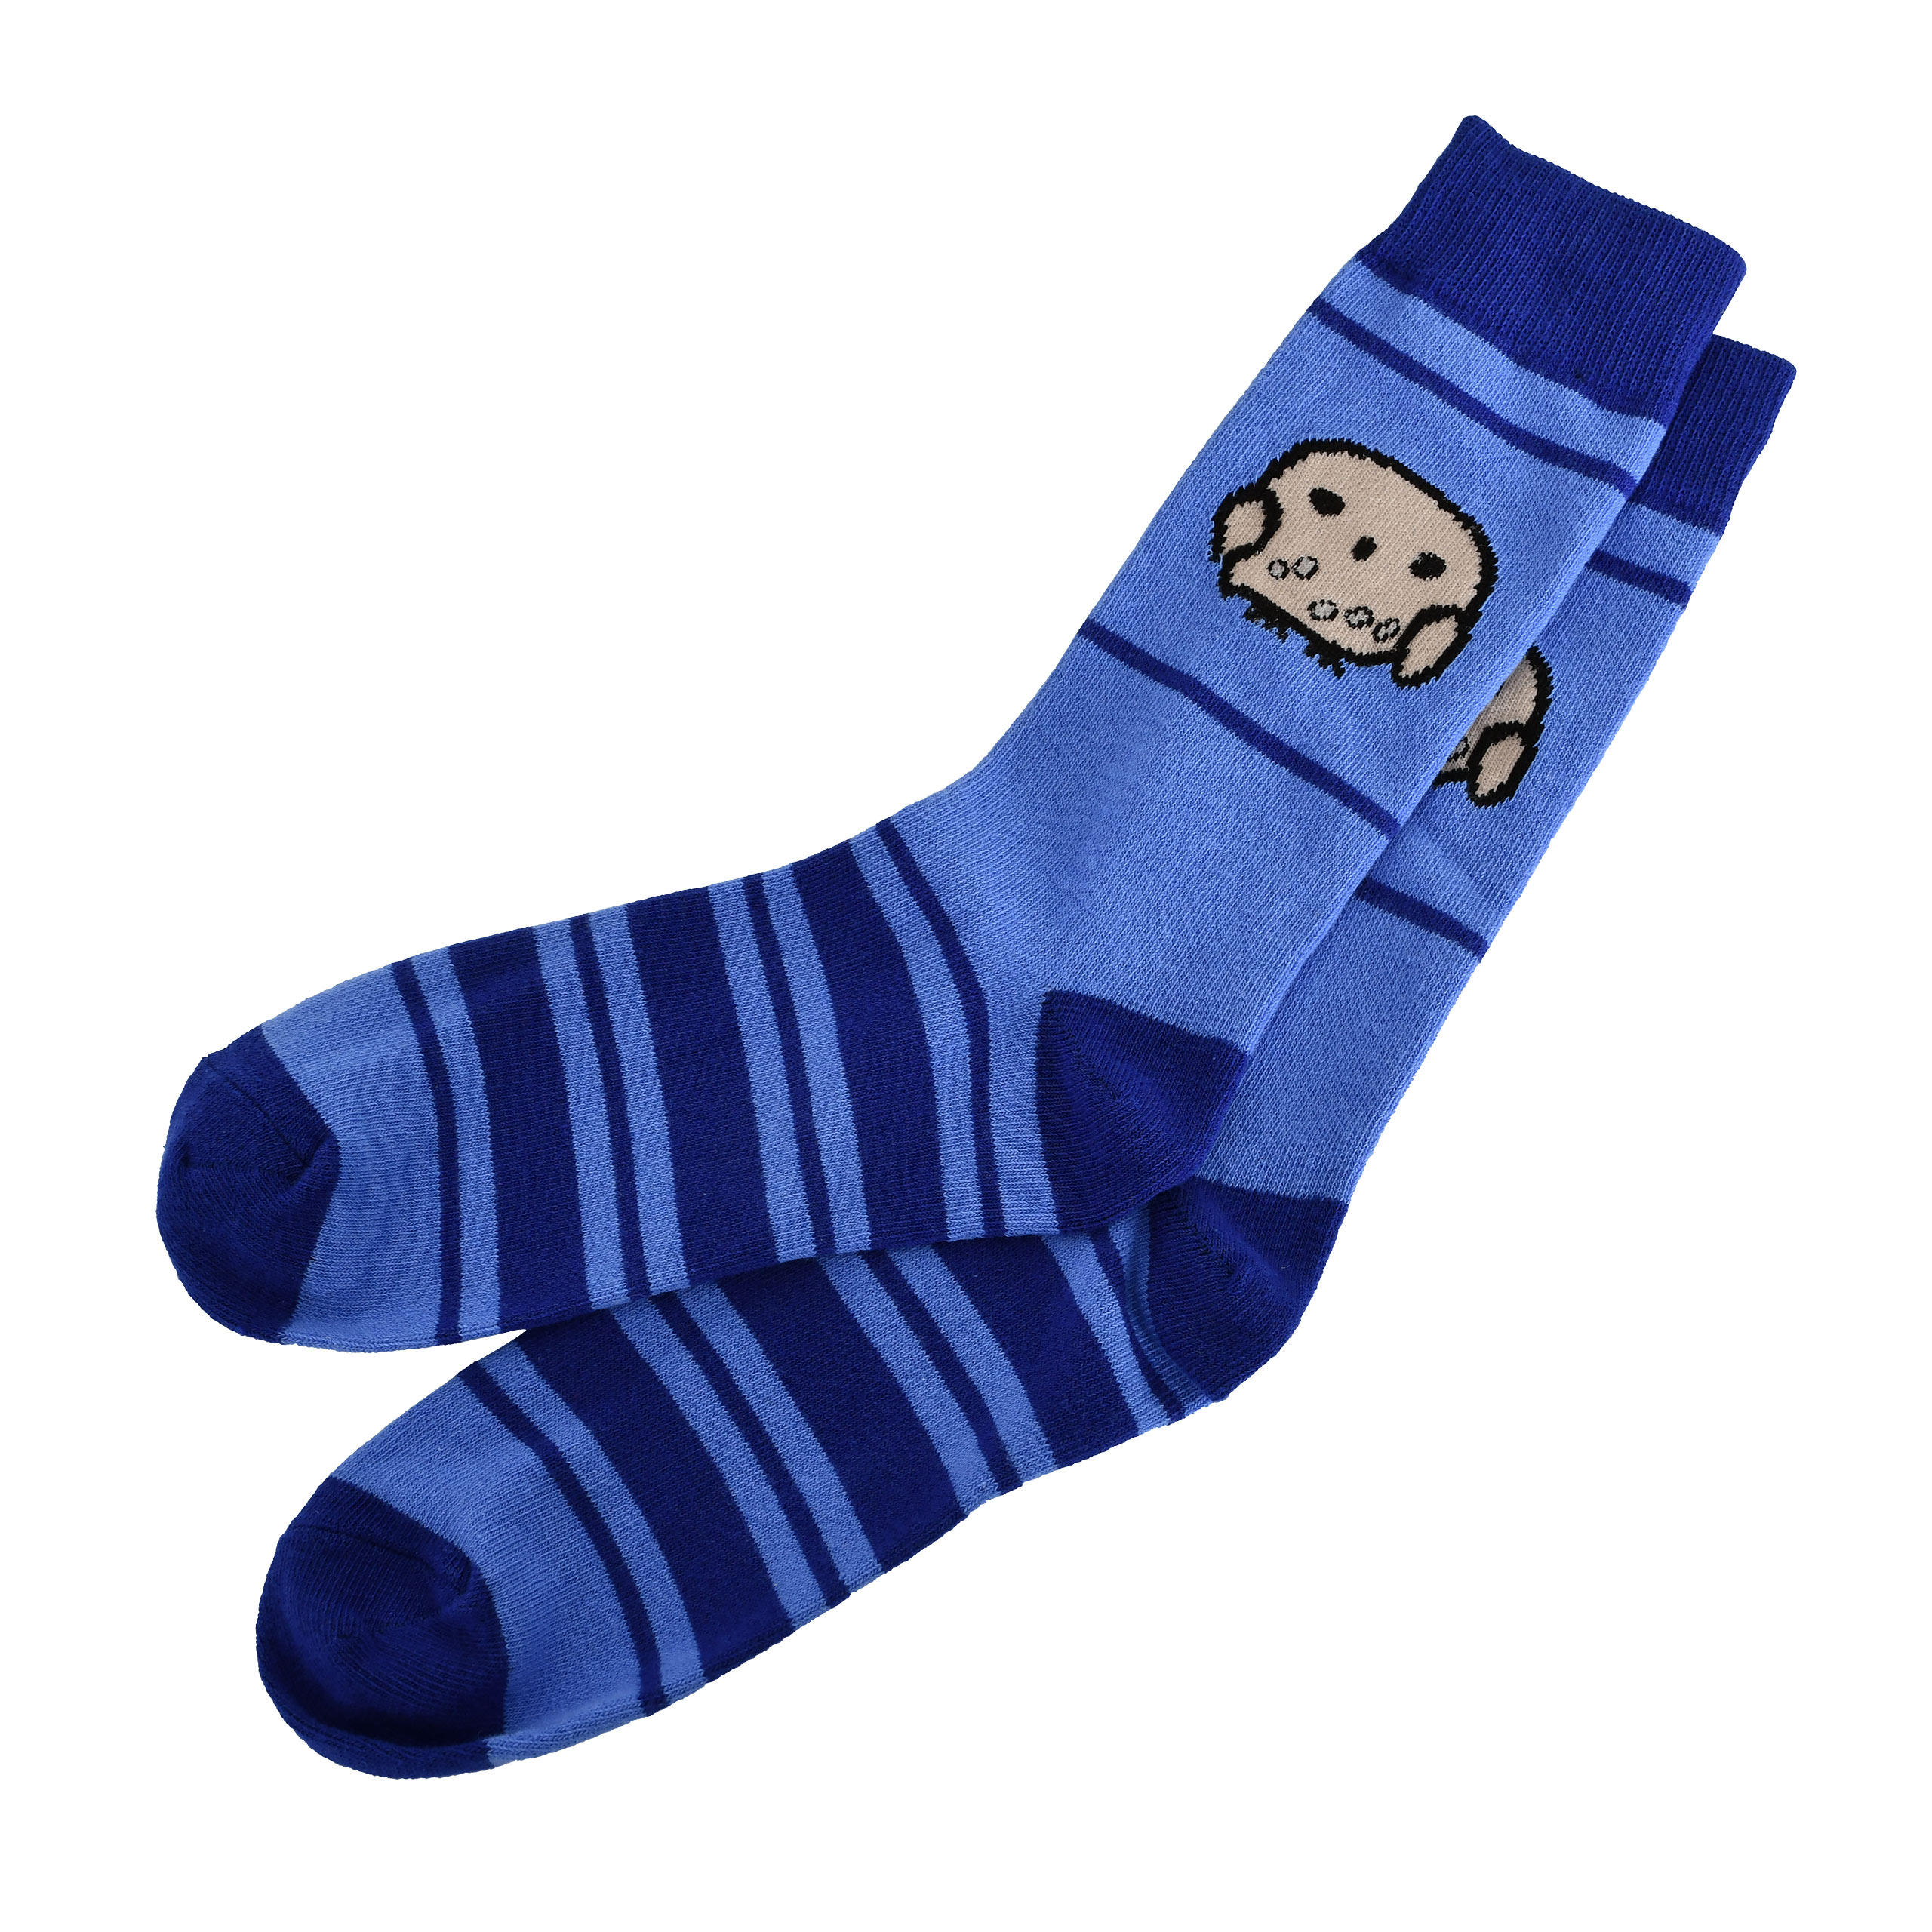 Harry Potter - Chaussettes Chibi Hedwig bleues